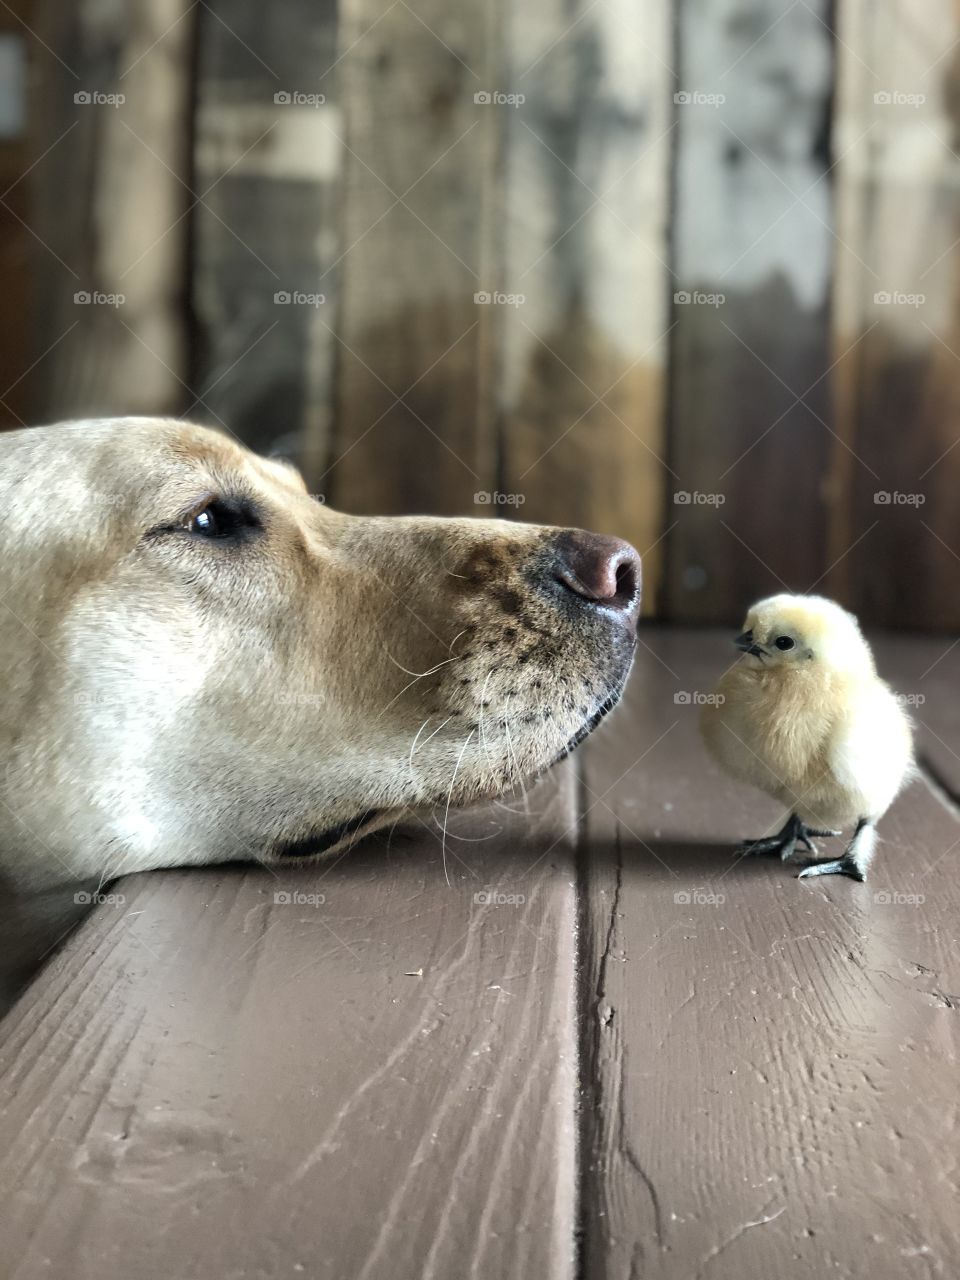 Curious pup looking at baby chic 